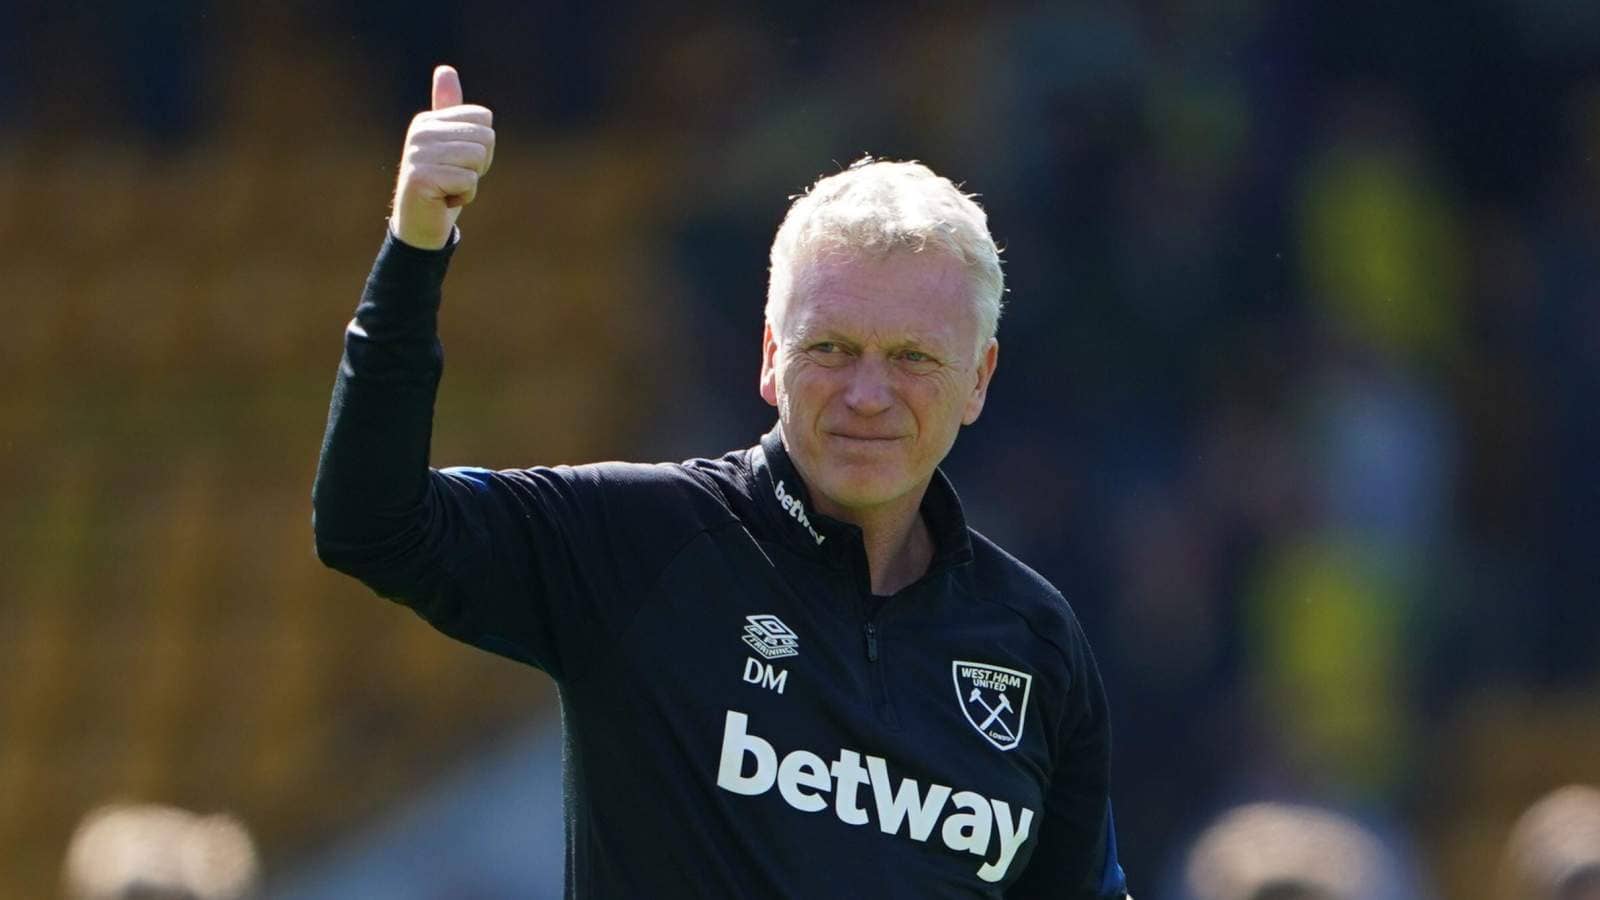 David-Moyes-with-his-thumbs-up-after-a-West-Ham-win.jpg